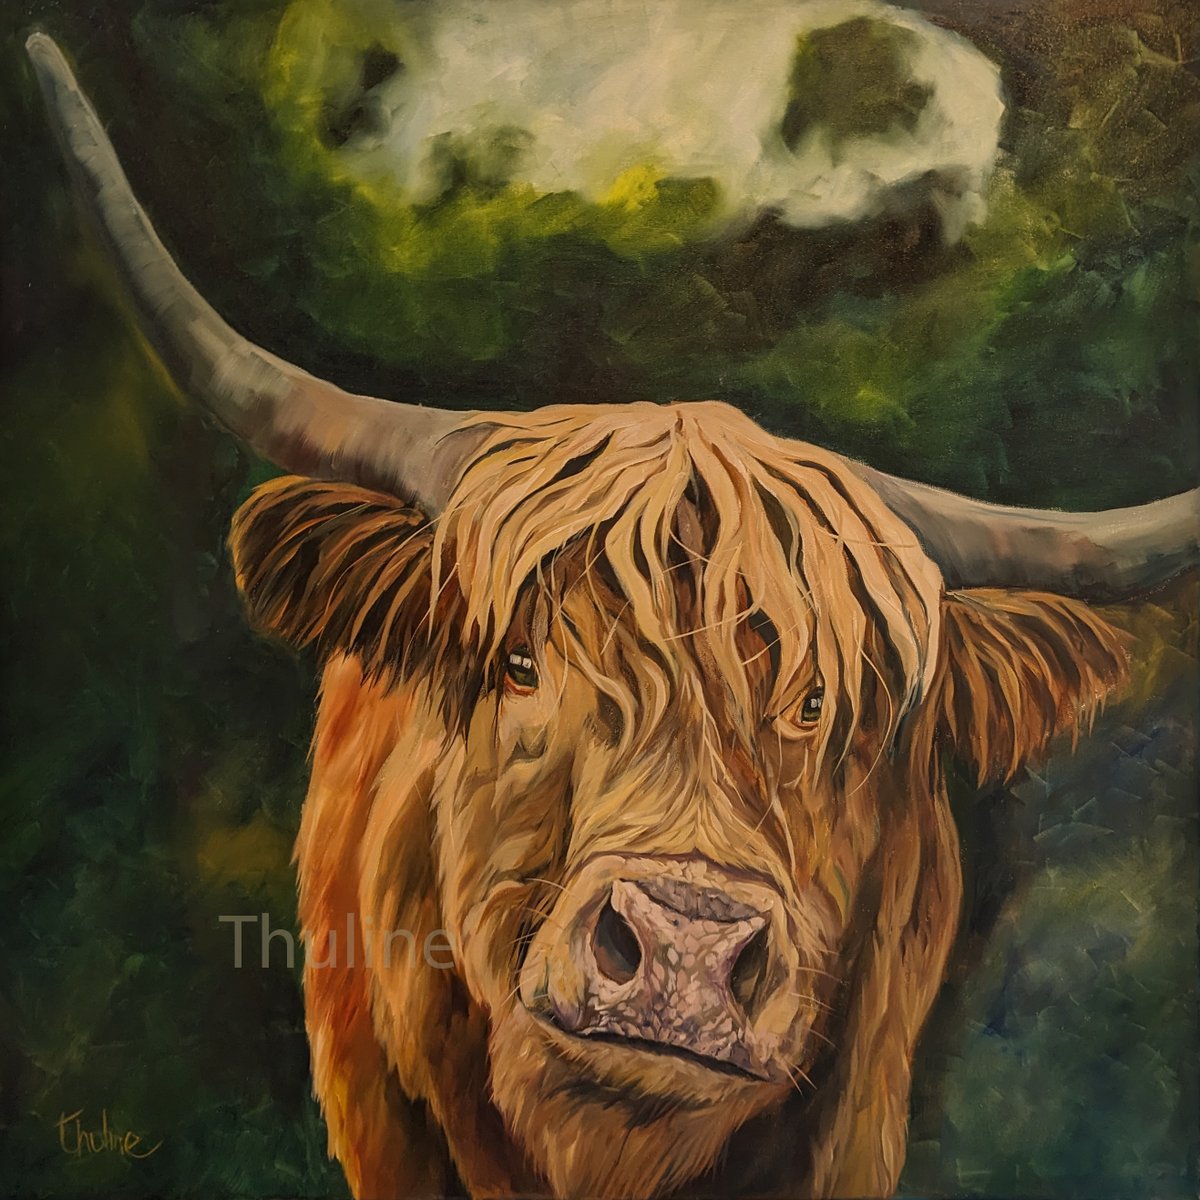 I've neglected twitter, but I'm back and will do my best to post something regularly. 'I've been called'. Oil painting on a deep canvas. 36x36'(91x91cm). £1400.
#highlandcow #cowseverywhere #farmlove  #cattle #cowsofinstagram #cowspiracy #farmanimals #cows #farming #cow #farmlife